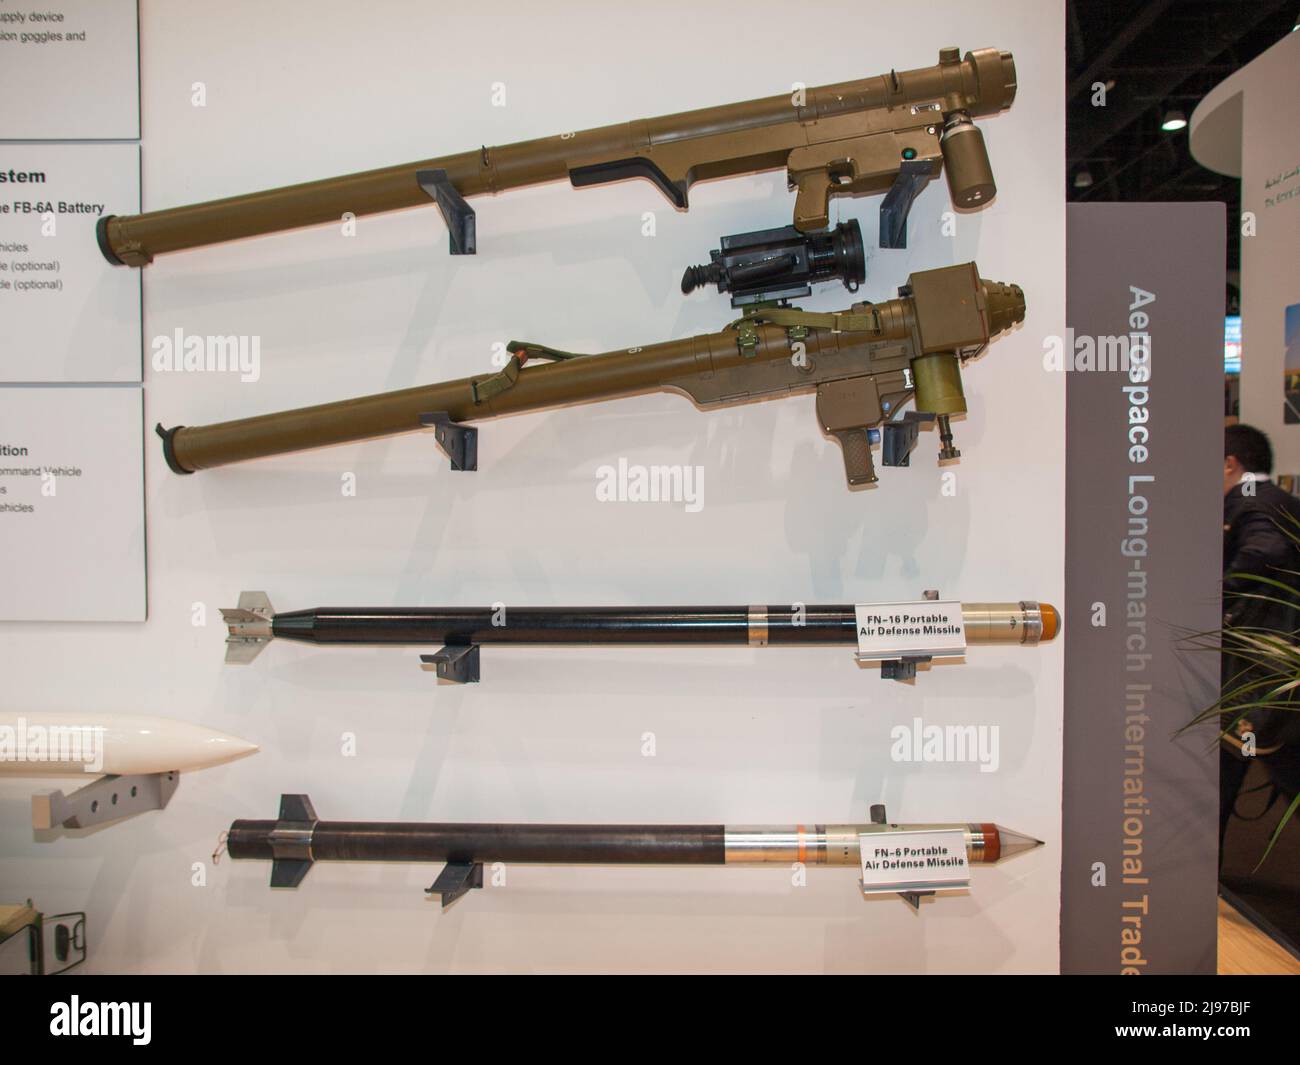 Abu Dhabi, UAE - Feb.23. 2011: FN6 and FN16 portable air defence missile at IDEX 2011 Stock Photo